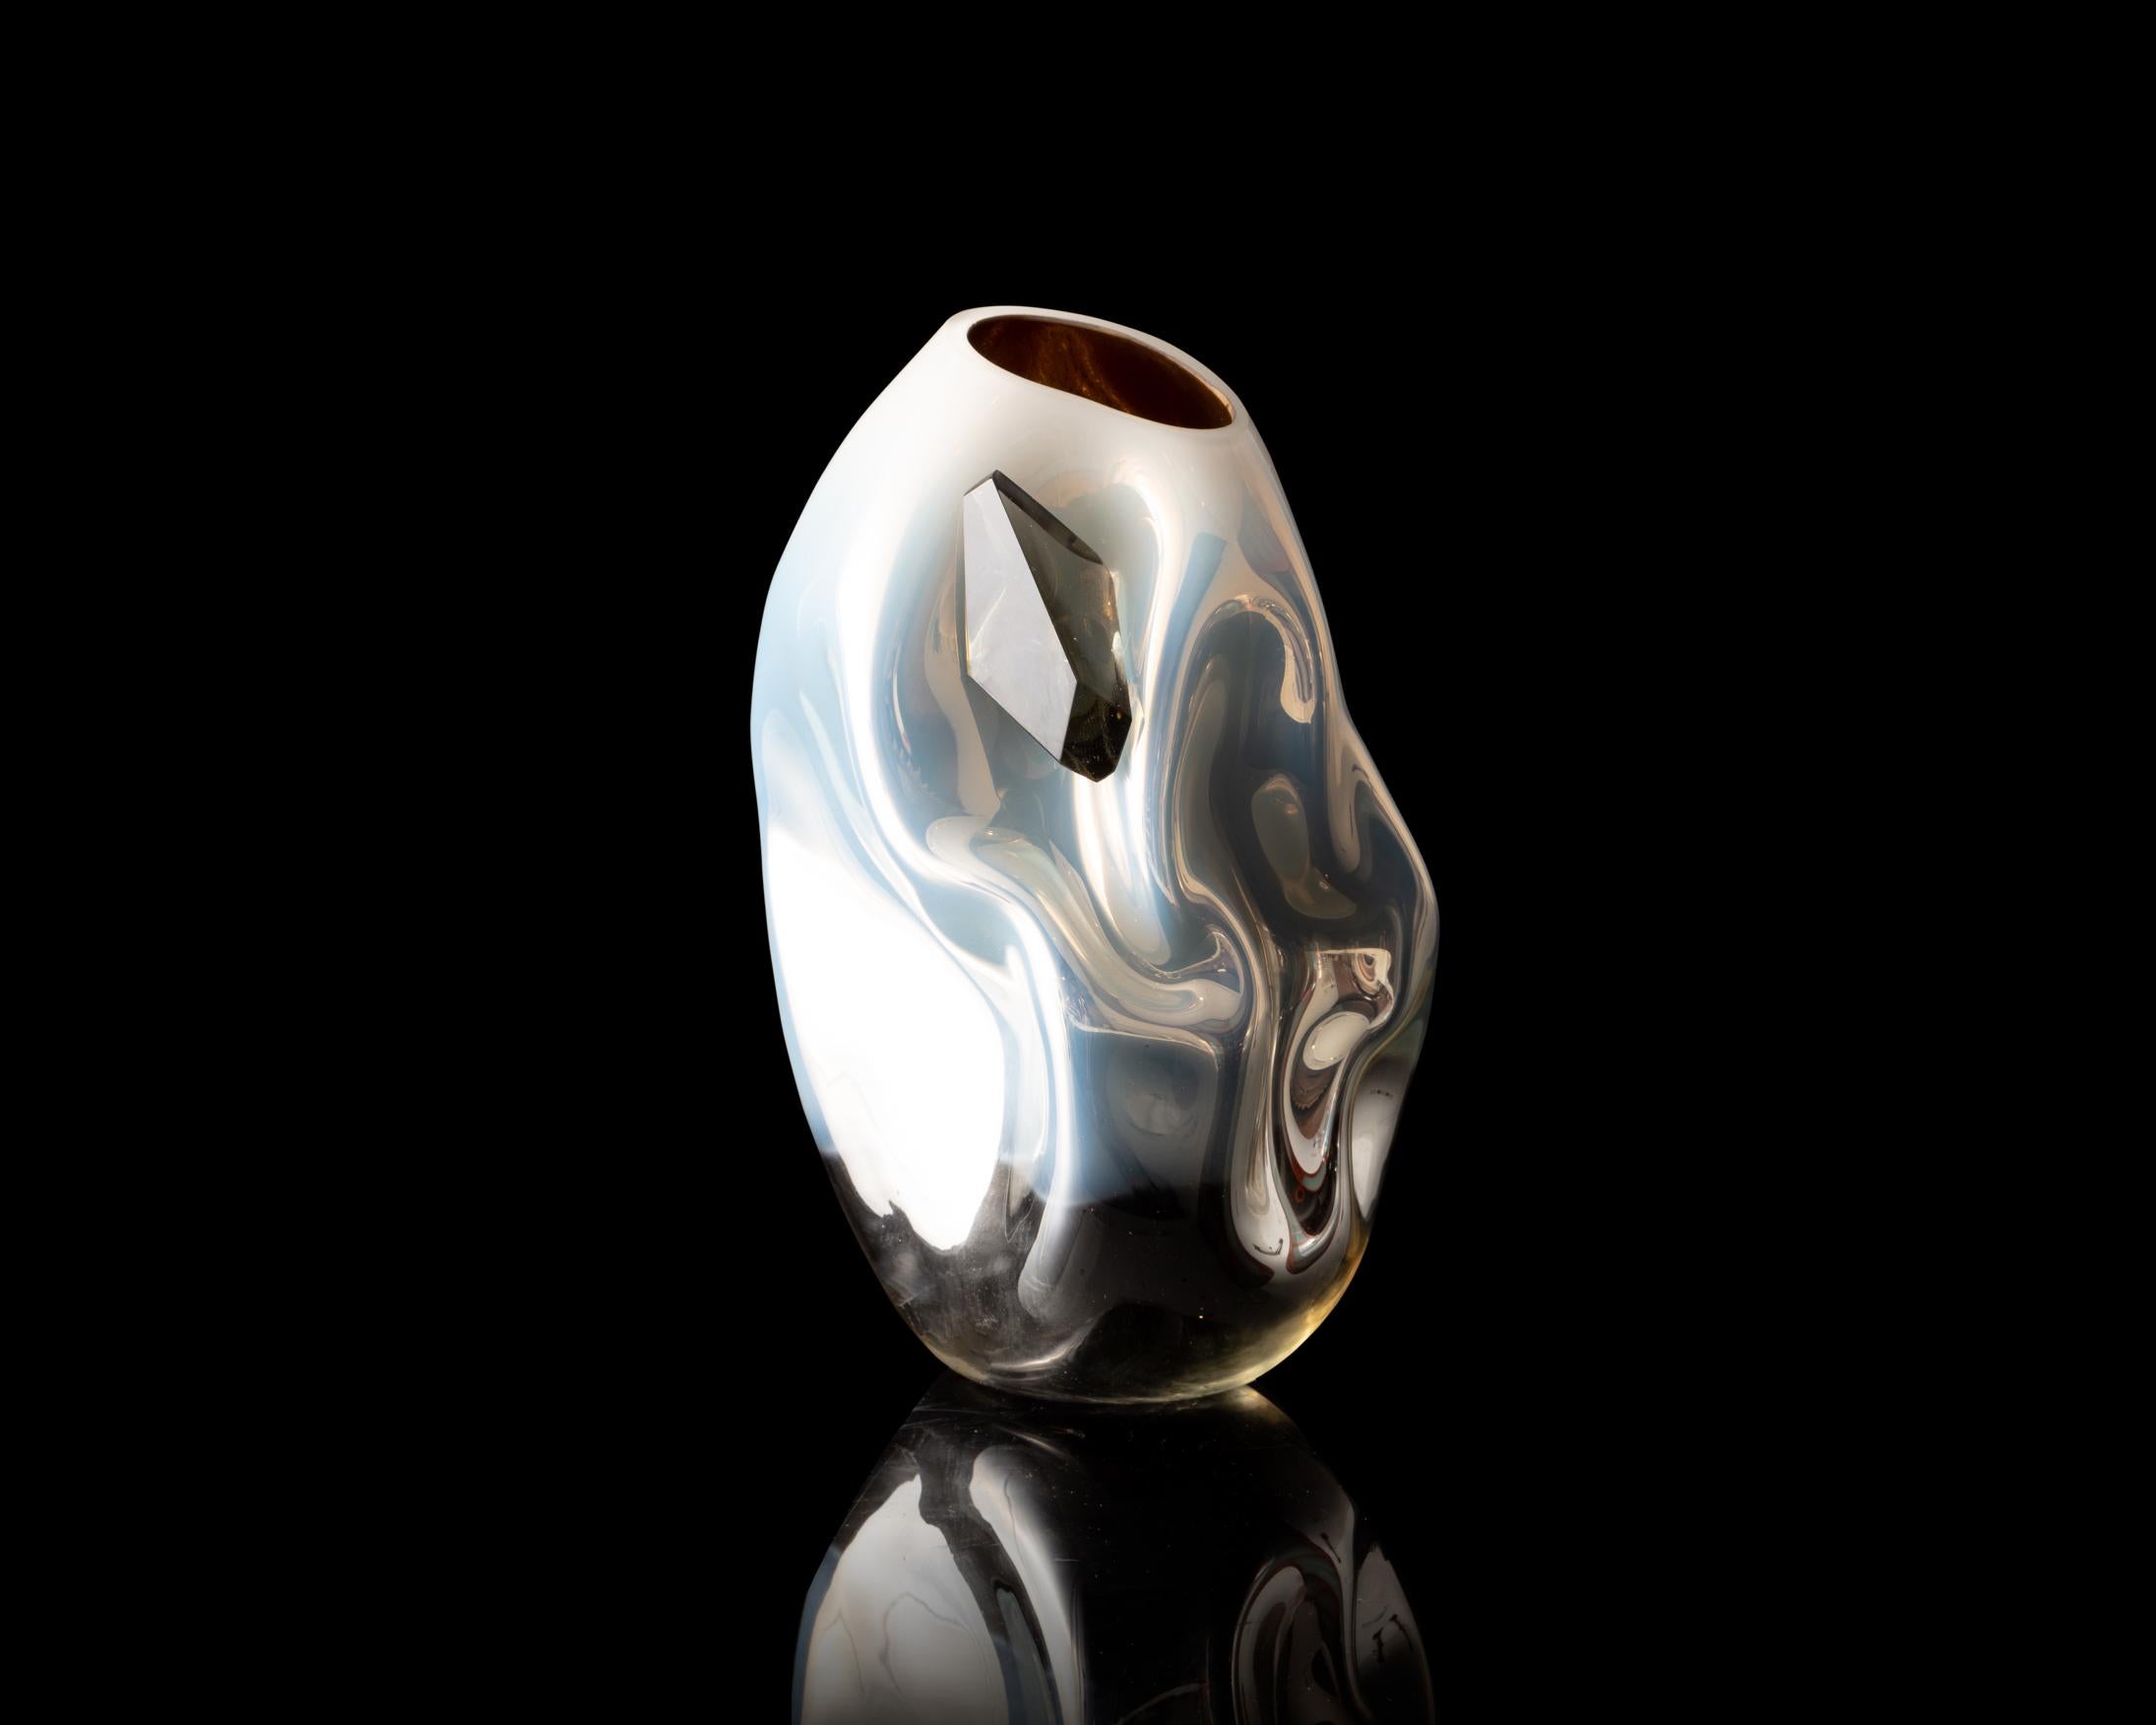 American Petit Crumpled Vessel in Silver and White Hand Blown Glass by Jeff Zimmerman